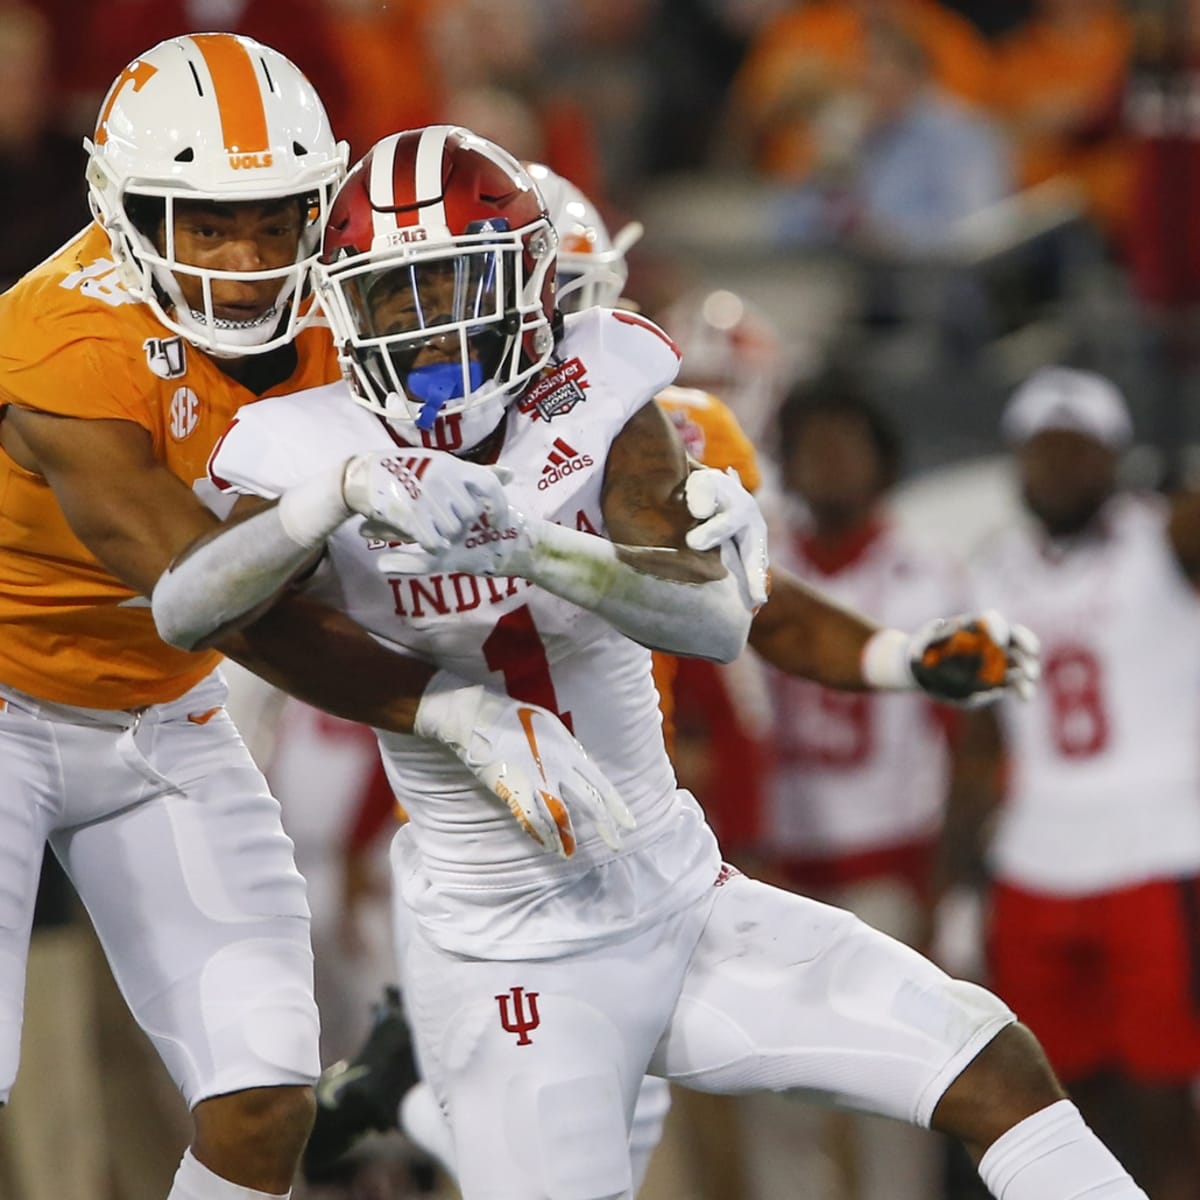 Ncaa Waives Wins Requirement For Football Bowl Games This Season Sports Illustrated Indiana Hoosiers News Analysis And More